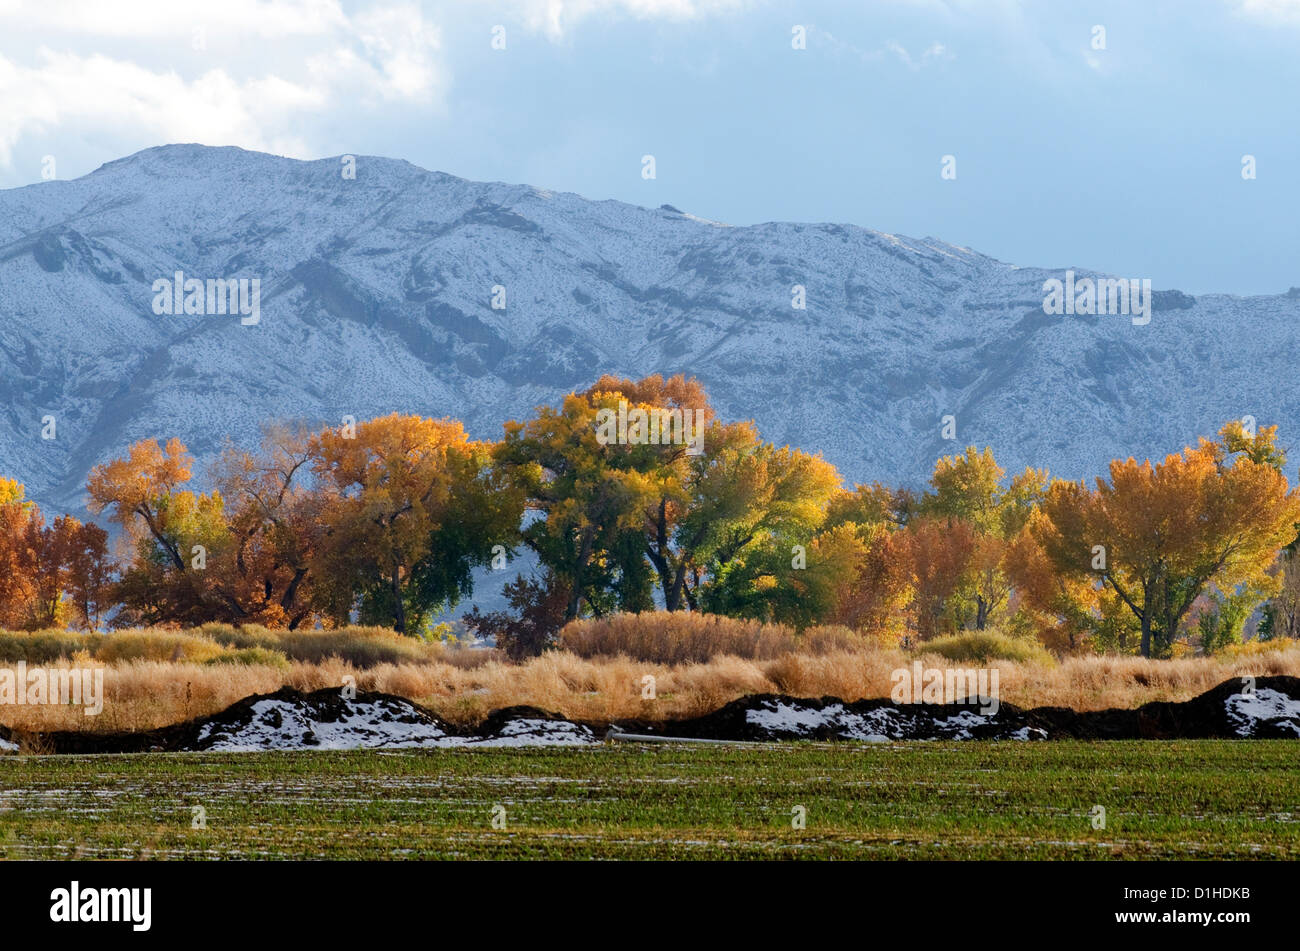 Cottonwood trees with fall color grow in front of snow covered mountains in Yerington, NV. Stock Photo